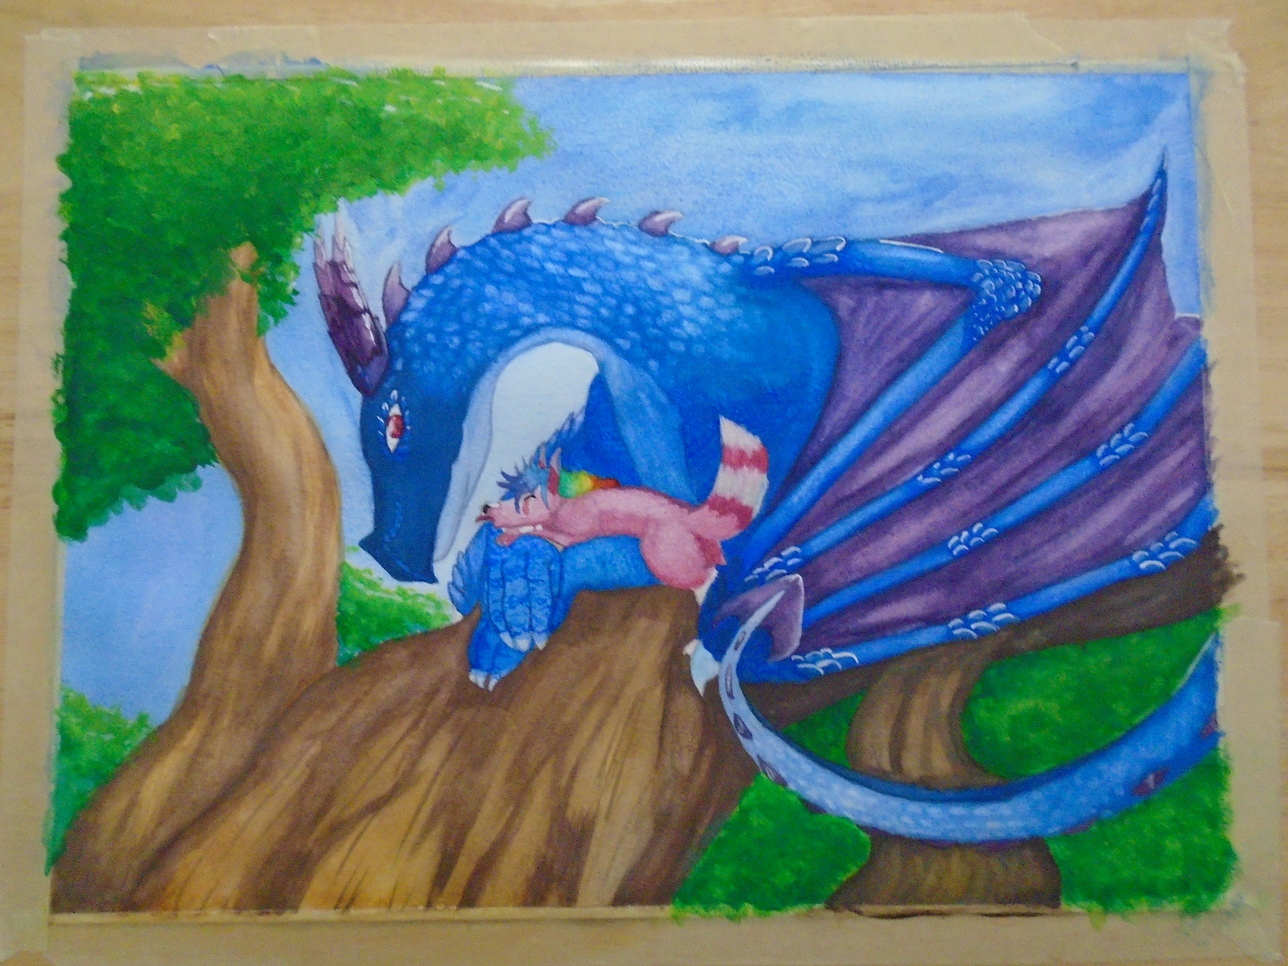 Pink creature laying on Dragon laying on tree branch